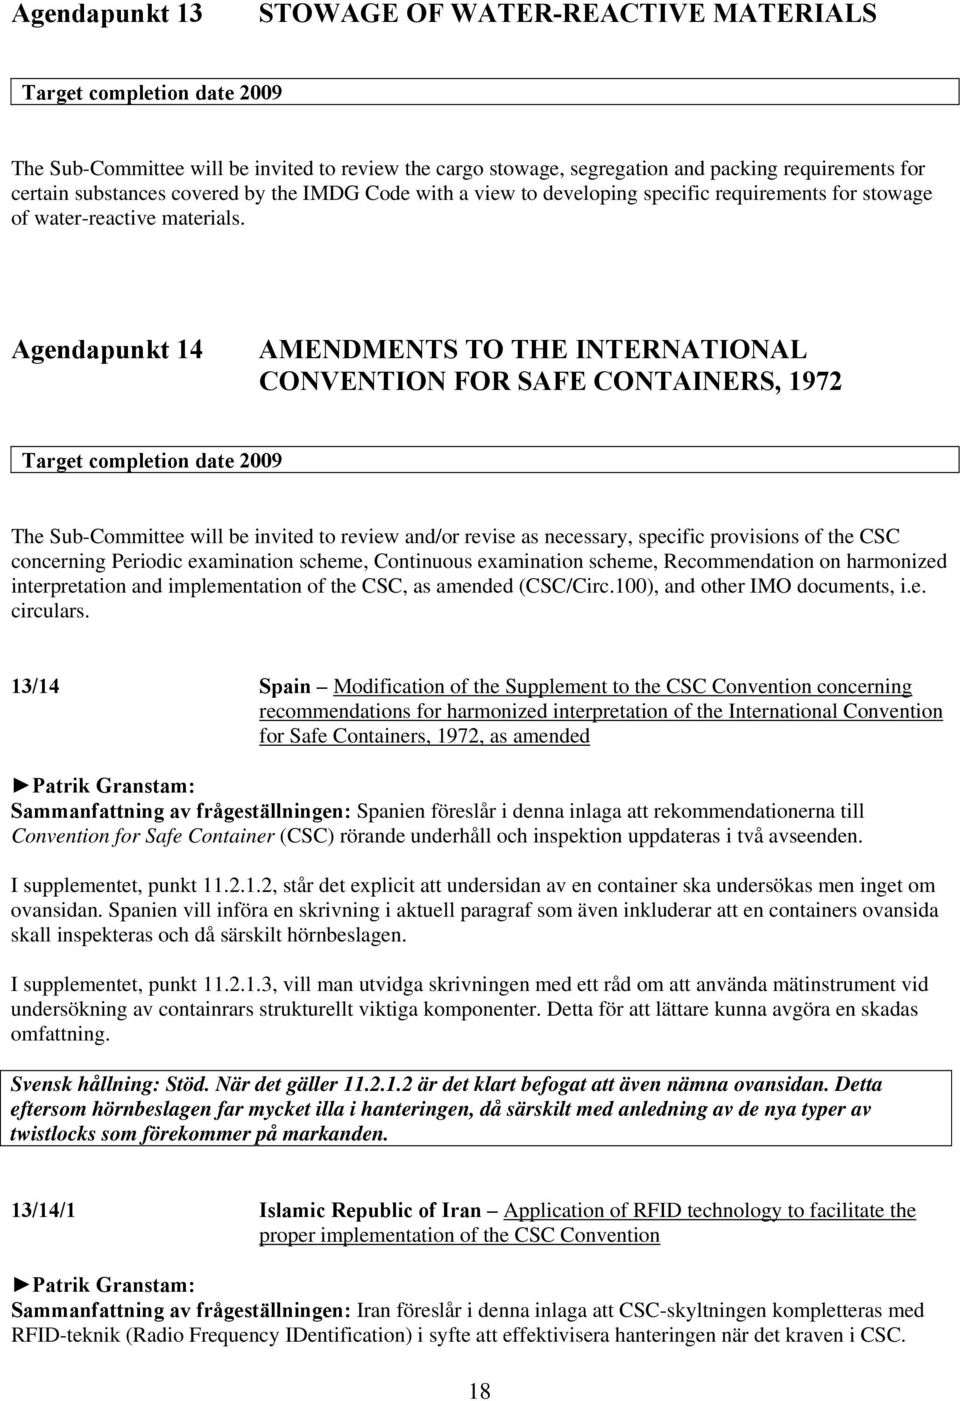 Agendapunkt 14 AMENDMENTS TO THE INTERNATIONAL CONVENTION FOR SAFE CONTAINERS, 1972 Target completion date 2009 The Sub-Committee will be invited to review and/or revise as necessary, specific